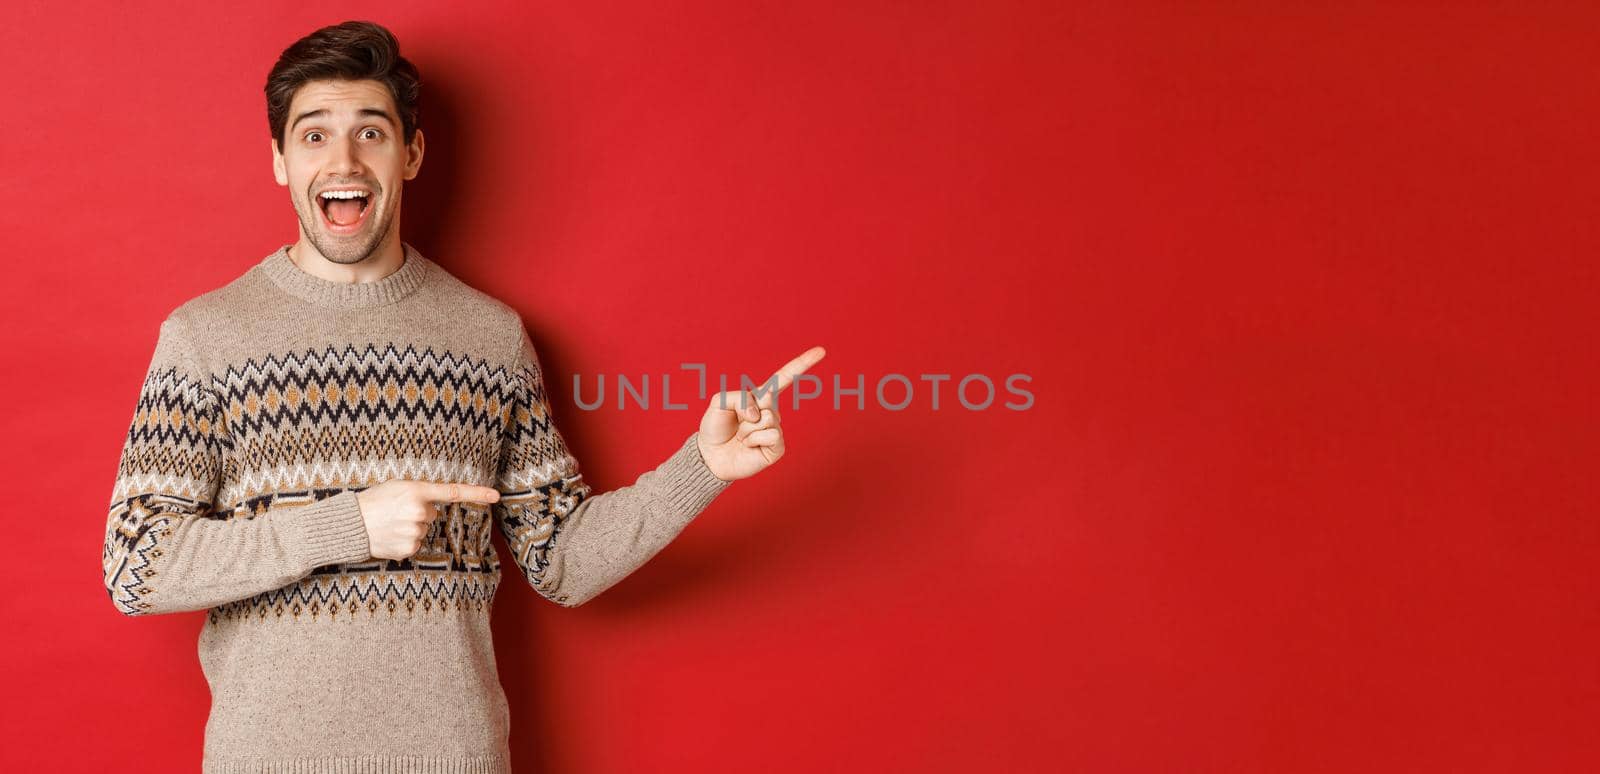 Concept of christmas celebration, winter holidays and lifestyle. Handsome man in xmas sweater pointing fingers right, smiling amazed, showing new year promo against red background.